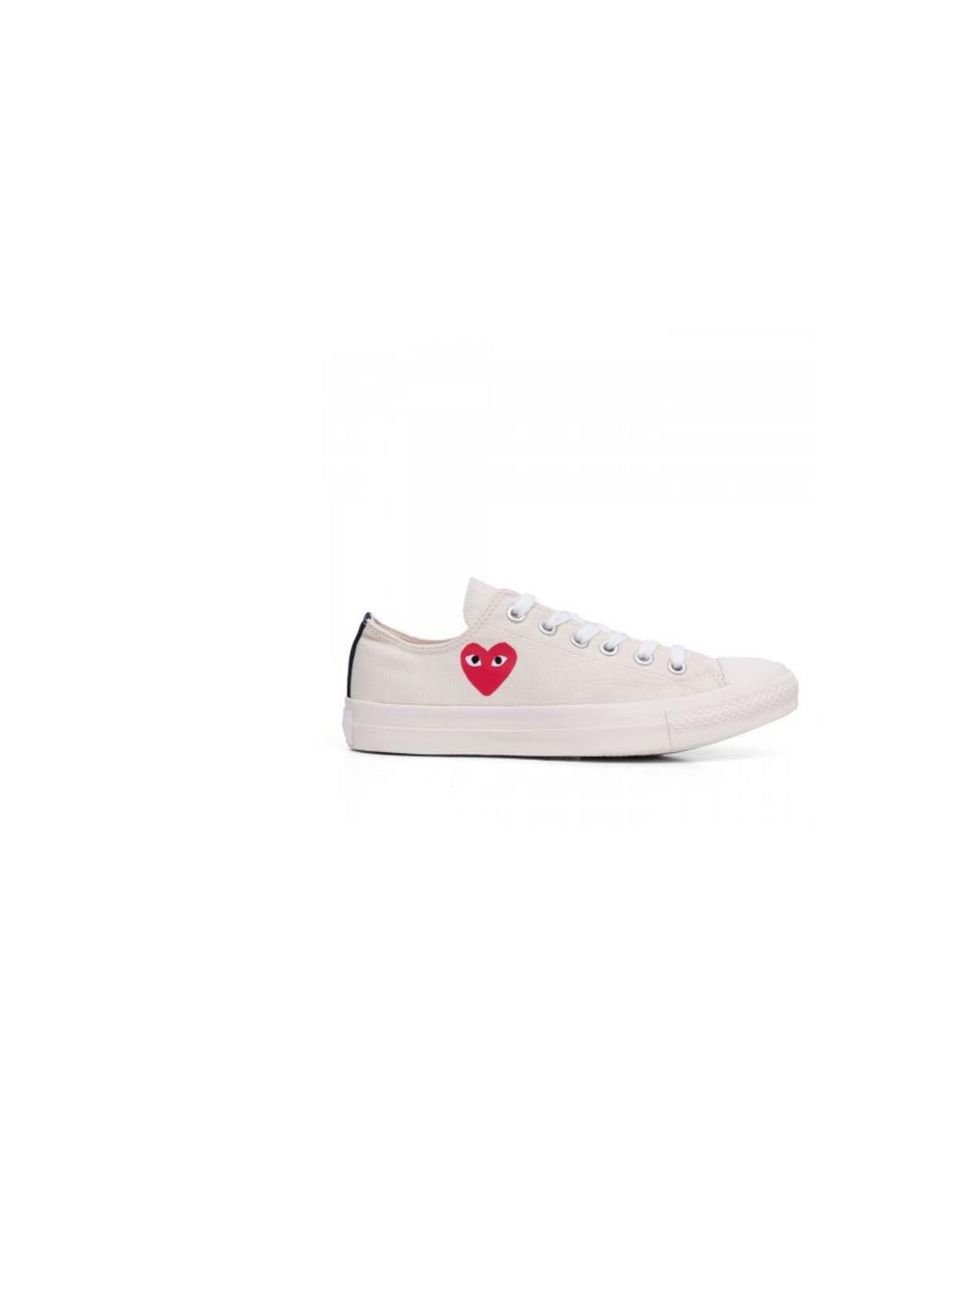 <p>A pair of white converse sneakers is a staple for laid-back style - very off-duty Fashion Editor, especially with this Comme des Garçons print!</p><p>Comme des Garçons Play Converse, £80 at <a href="http://shop.doverstreetmarket.com/comme-des-garcons/p